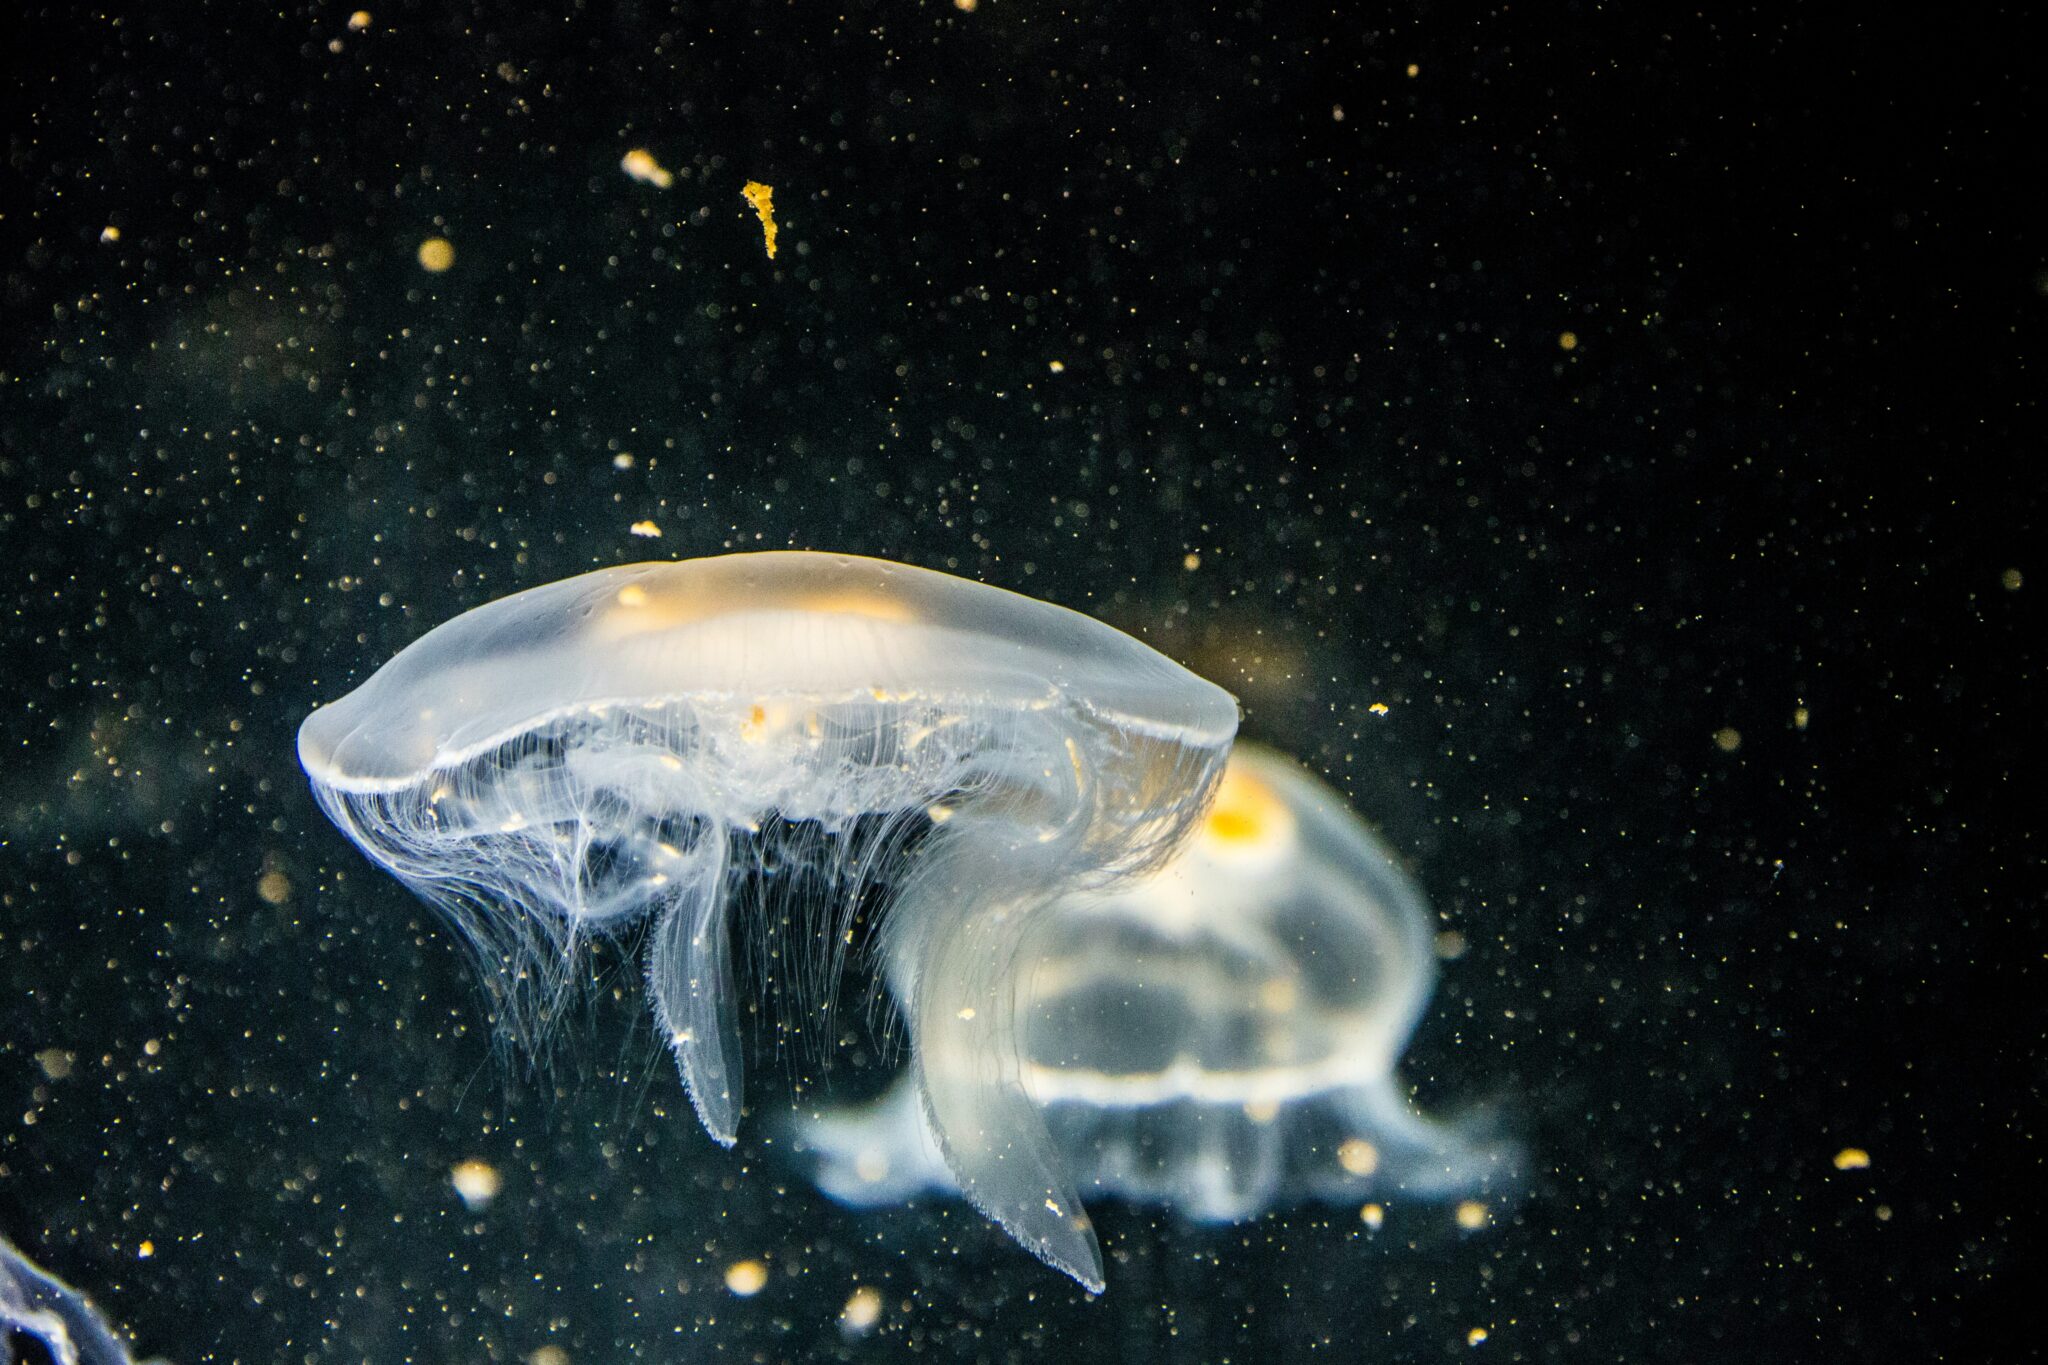 Two jellyfish against blackwater background